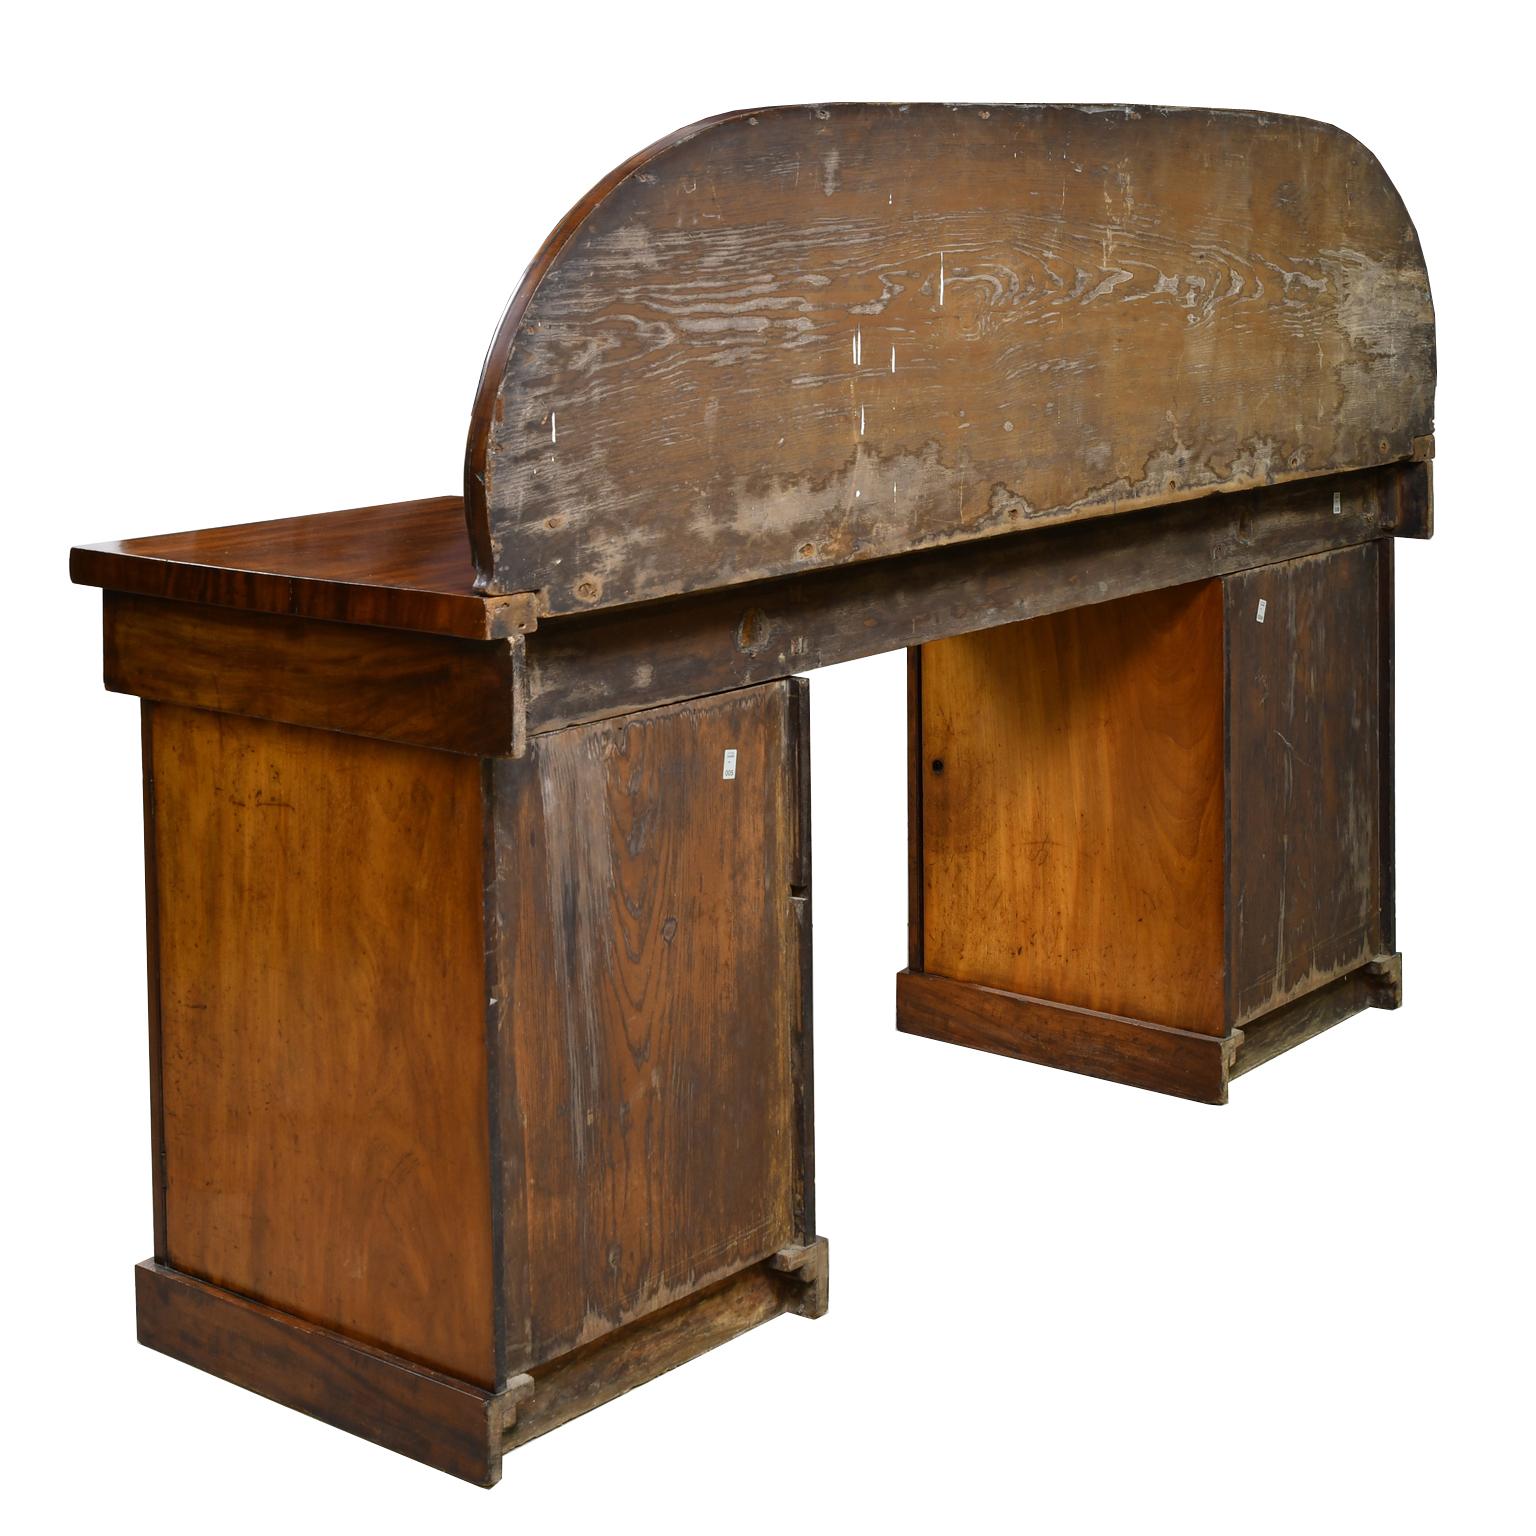 19th Century English Victorian Pedestal Base Sideboard in Mahogany, circa 1850 For Sale